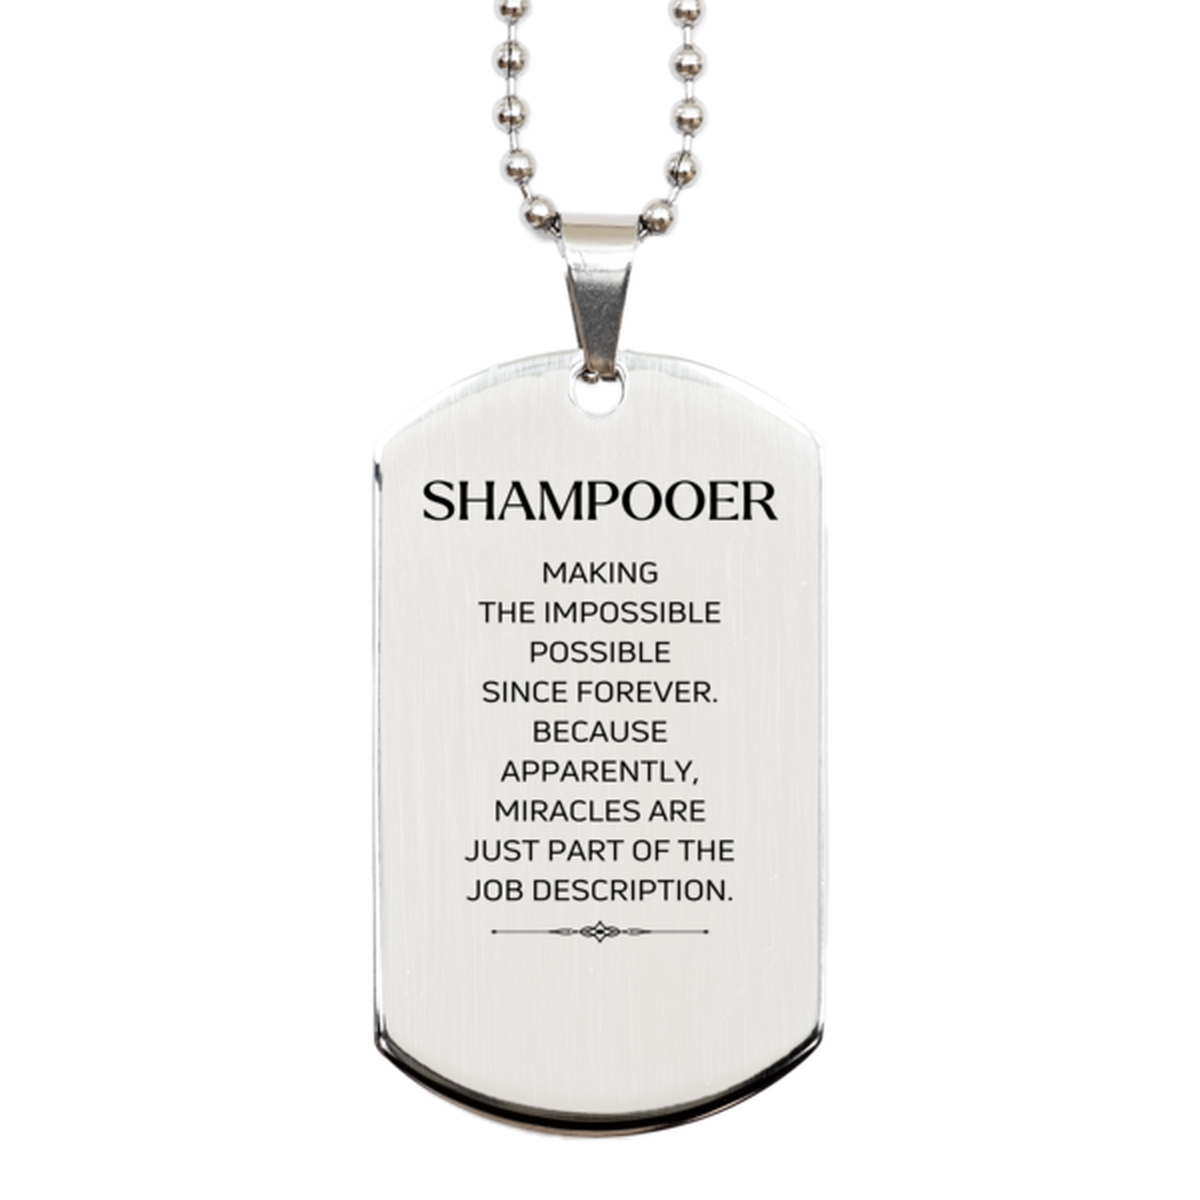 Funny Shampooer Gifts, Miracles are just part of the job description, Inspirational Birthday Silver Dog Tag For Shampooer, Men, Women, Coworkers, Friends, Boss